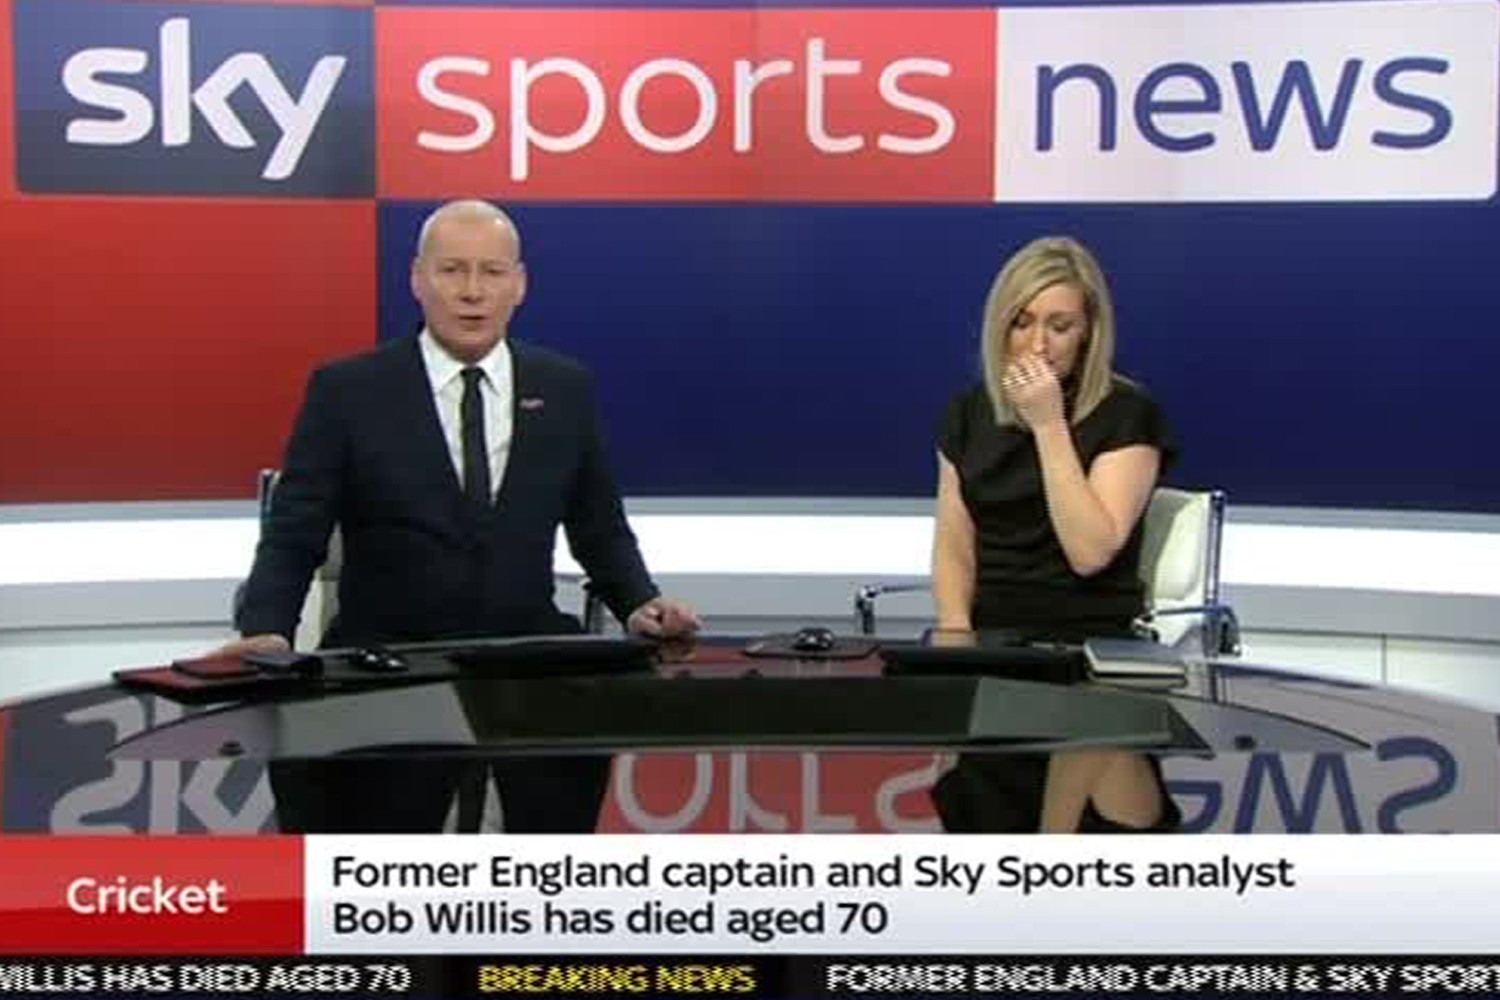 , Sky Sports News presenter Vicky Gomersall breaks down in tears on air after tragic news of Bob Willis death aged 70